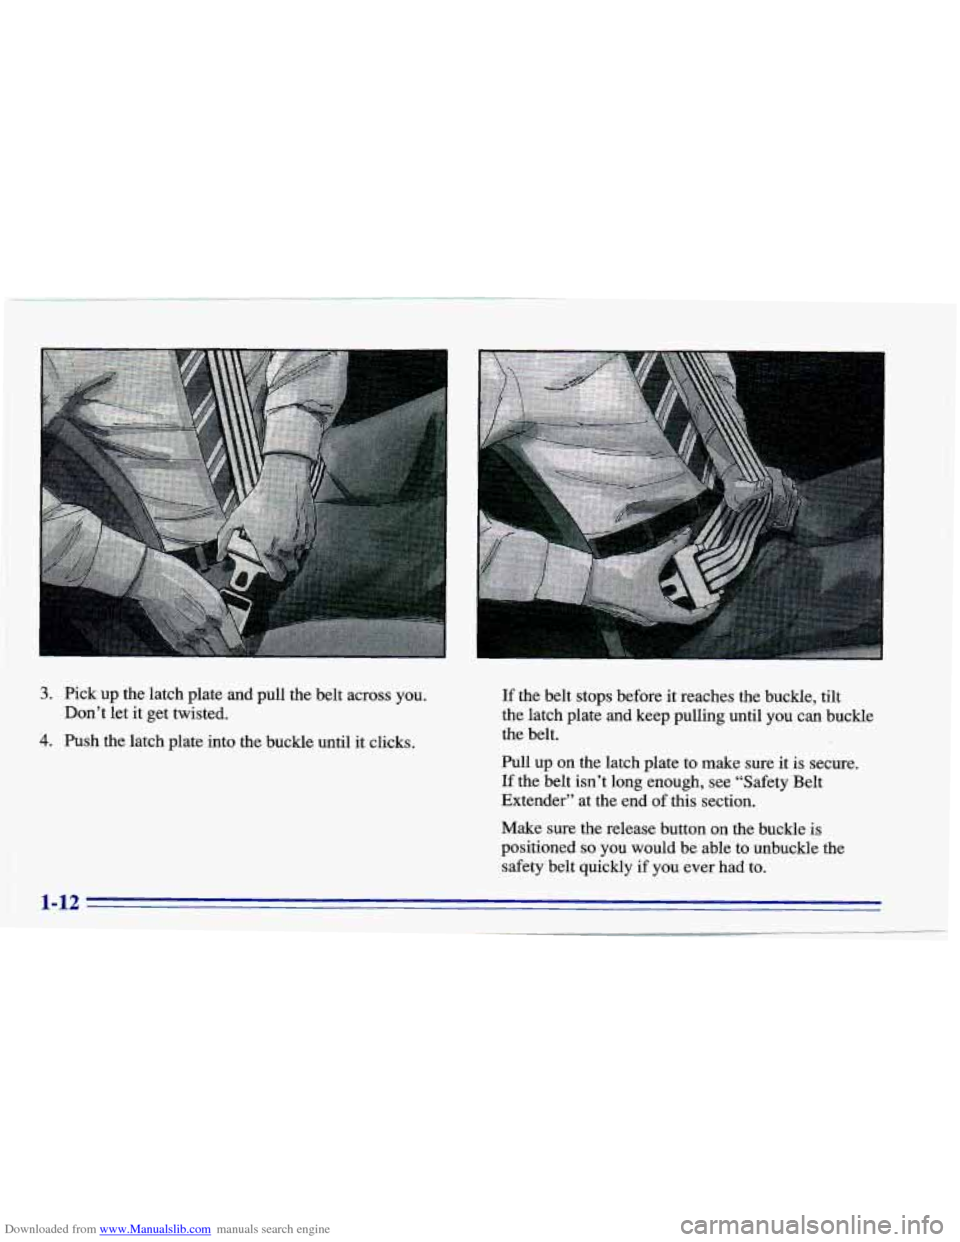 CHEVROLET CAVALIER 1996 3.G Owners Manual Downloaded from www.Manualslib.com manuals search engine 3. Pick up the latch plate and  pull the belt  across  you. 
4. Push  the latch  plate  into the  buckle  until  it clicks. 
Don’t  let 
it g